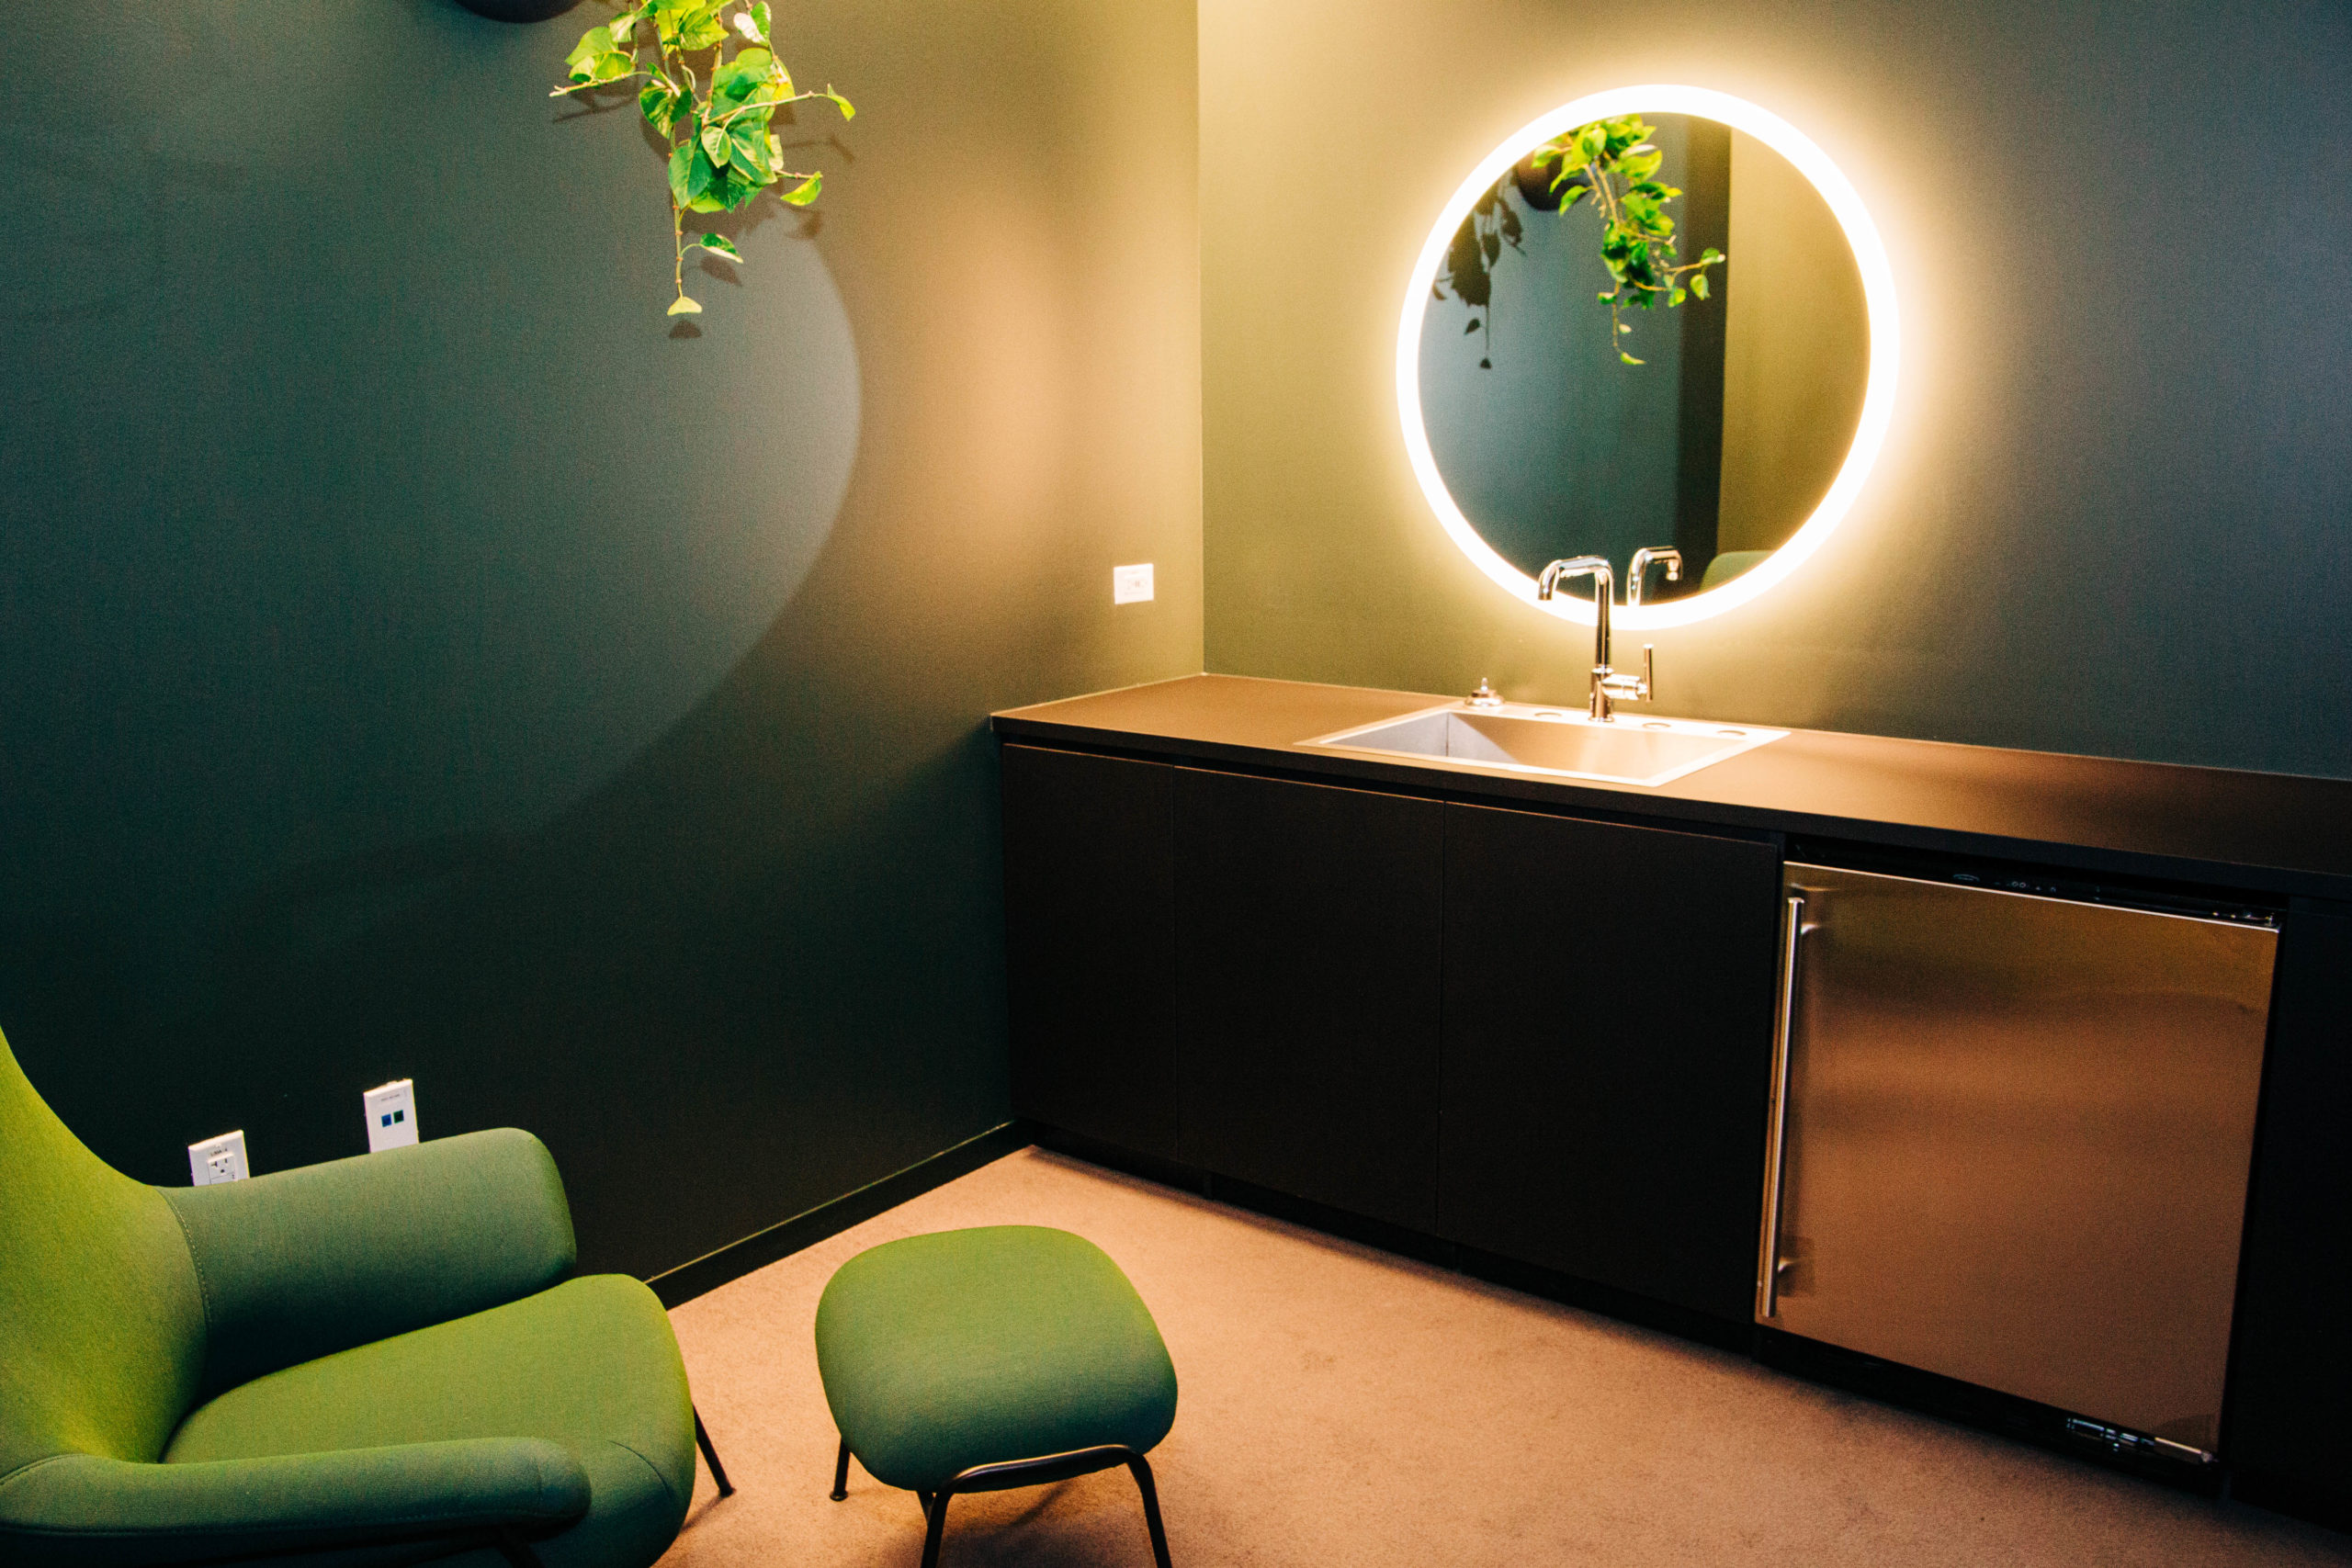 A small room painted dark green with soft lighting. One side includes a counter with a metal door, a sink and mirror with lights around it. Nearby is a modern green arm chair and ottoman. 